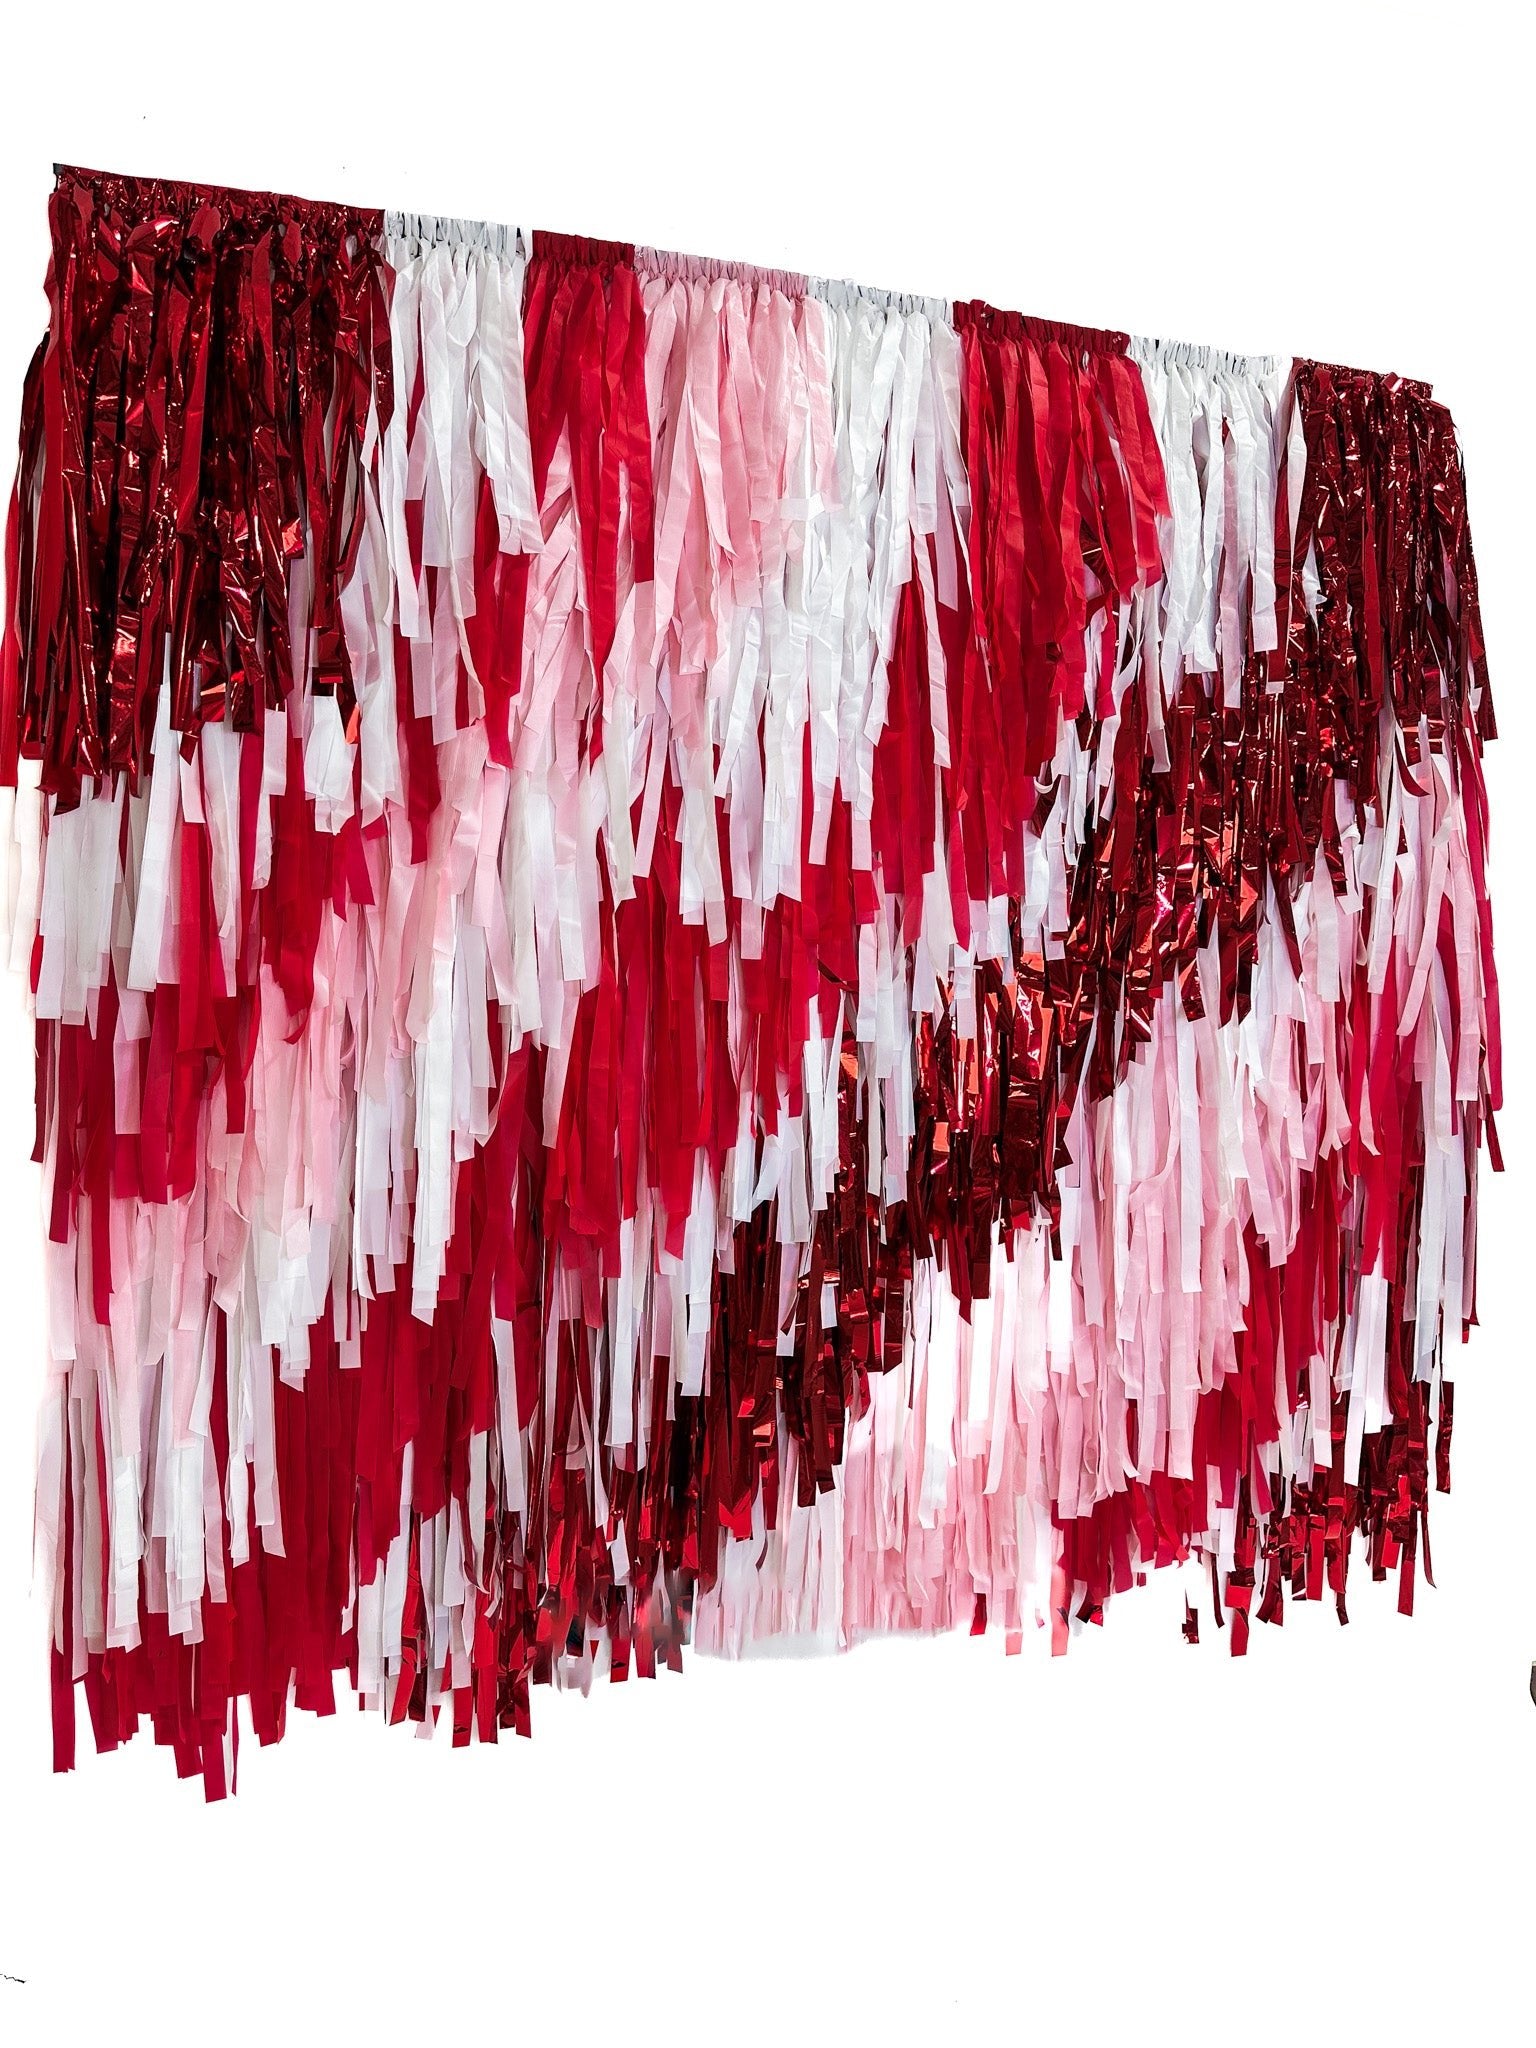 Candy Cane Lane Backdrop - Oh My Darling Party Co-christmaschristmas 22default #Fringe_Backdrop#